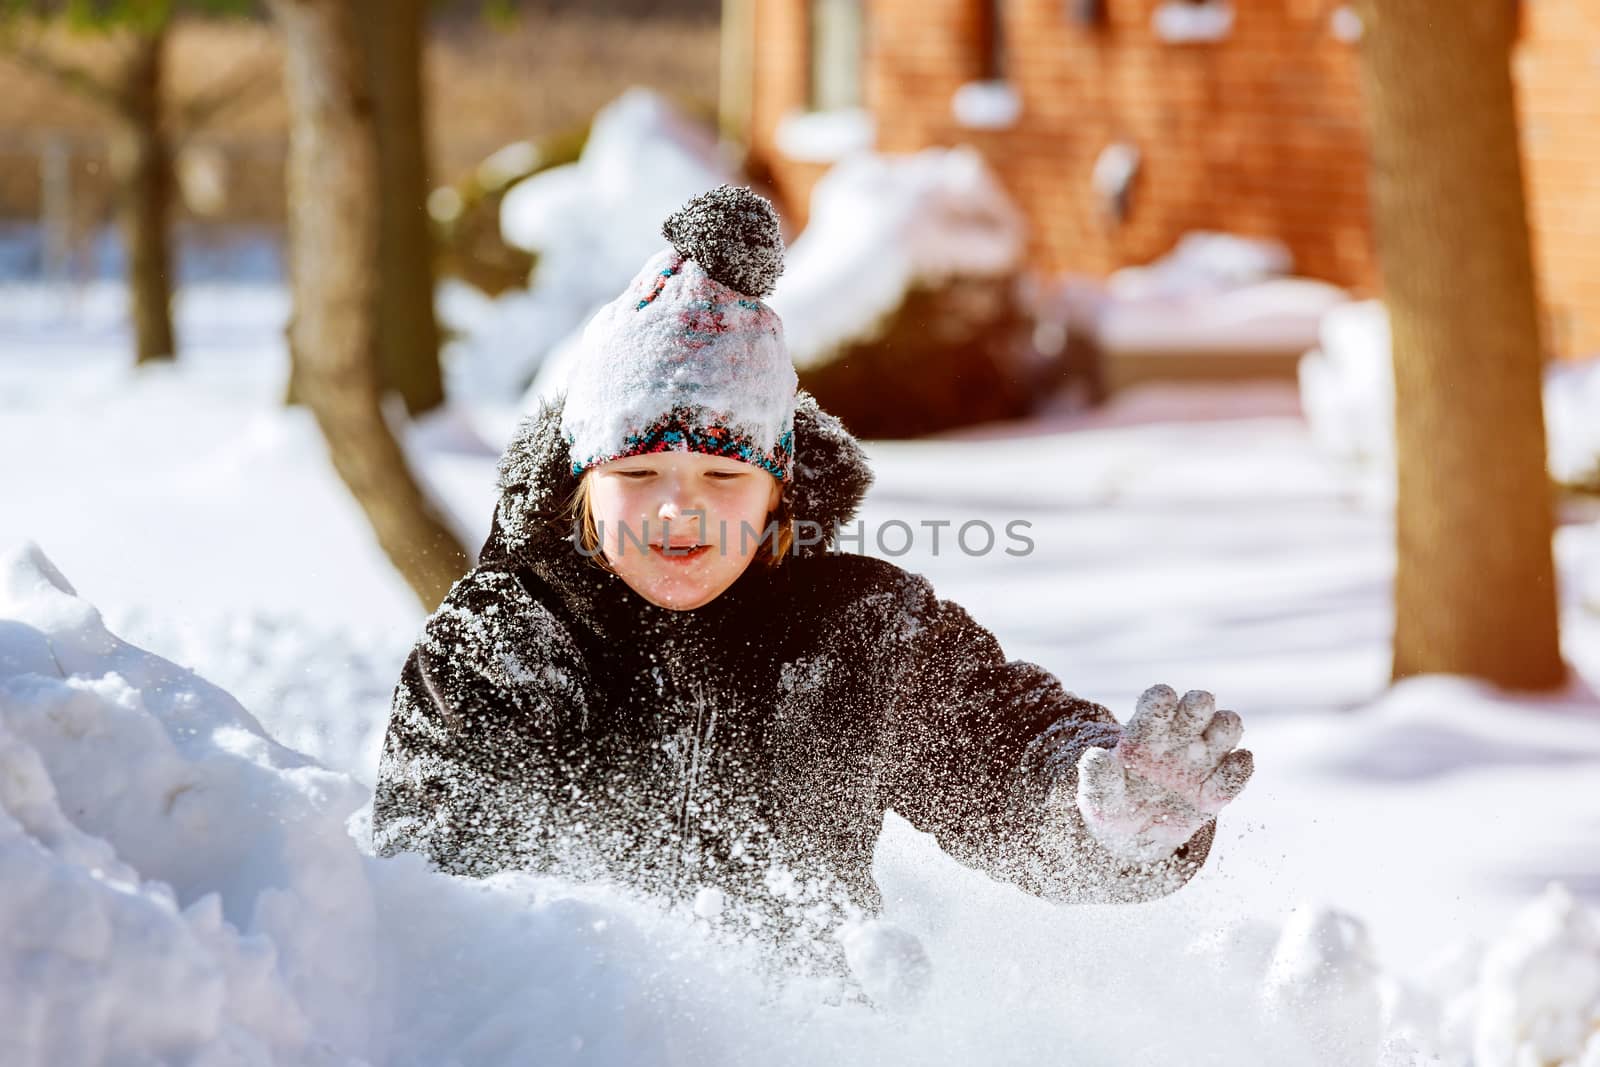 Snow on home drive way little child play outdoors on snowy by ungvar